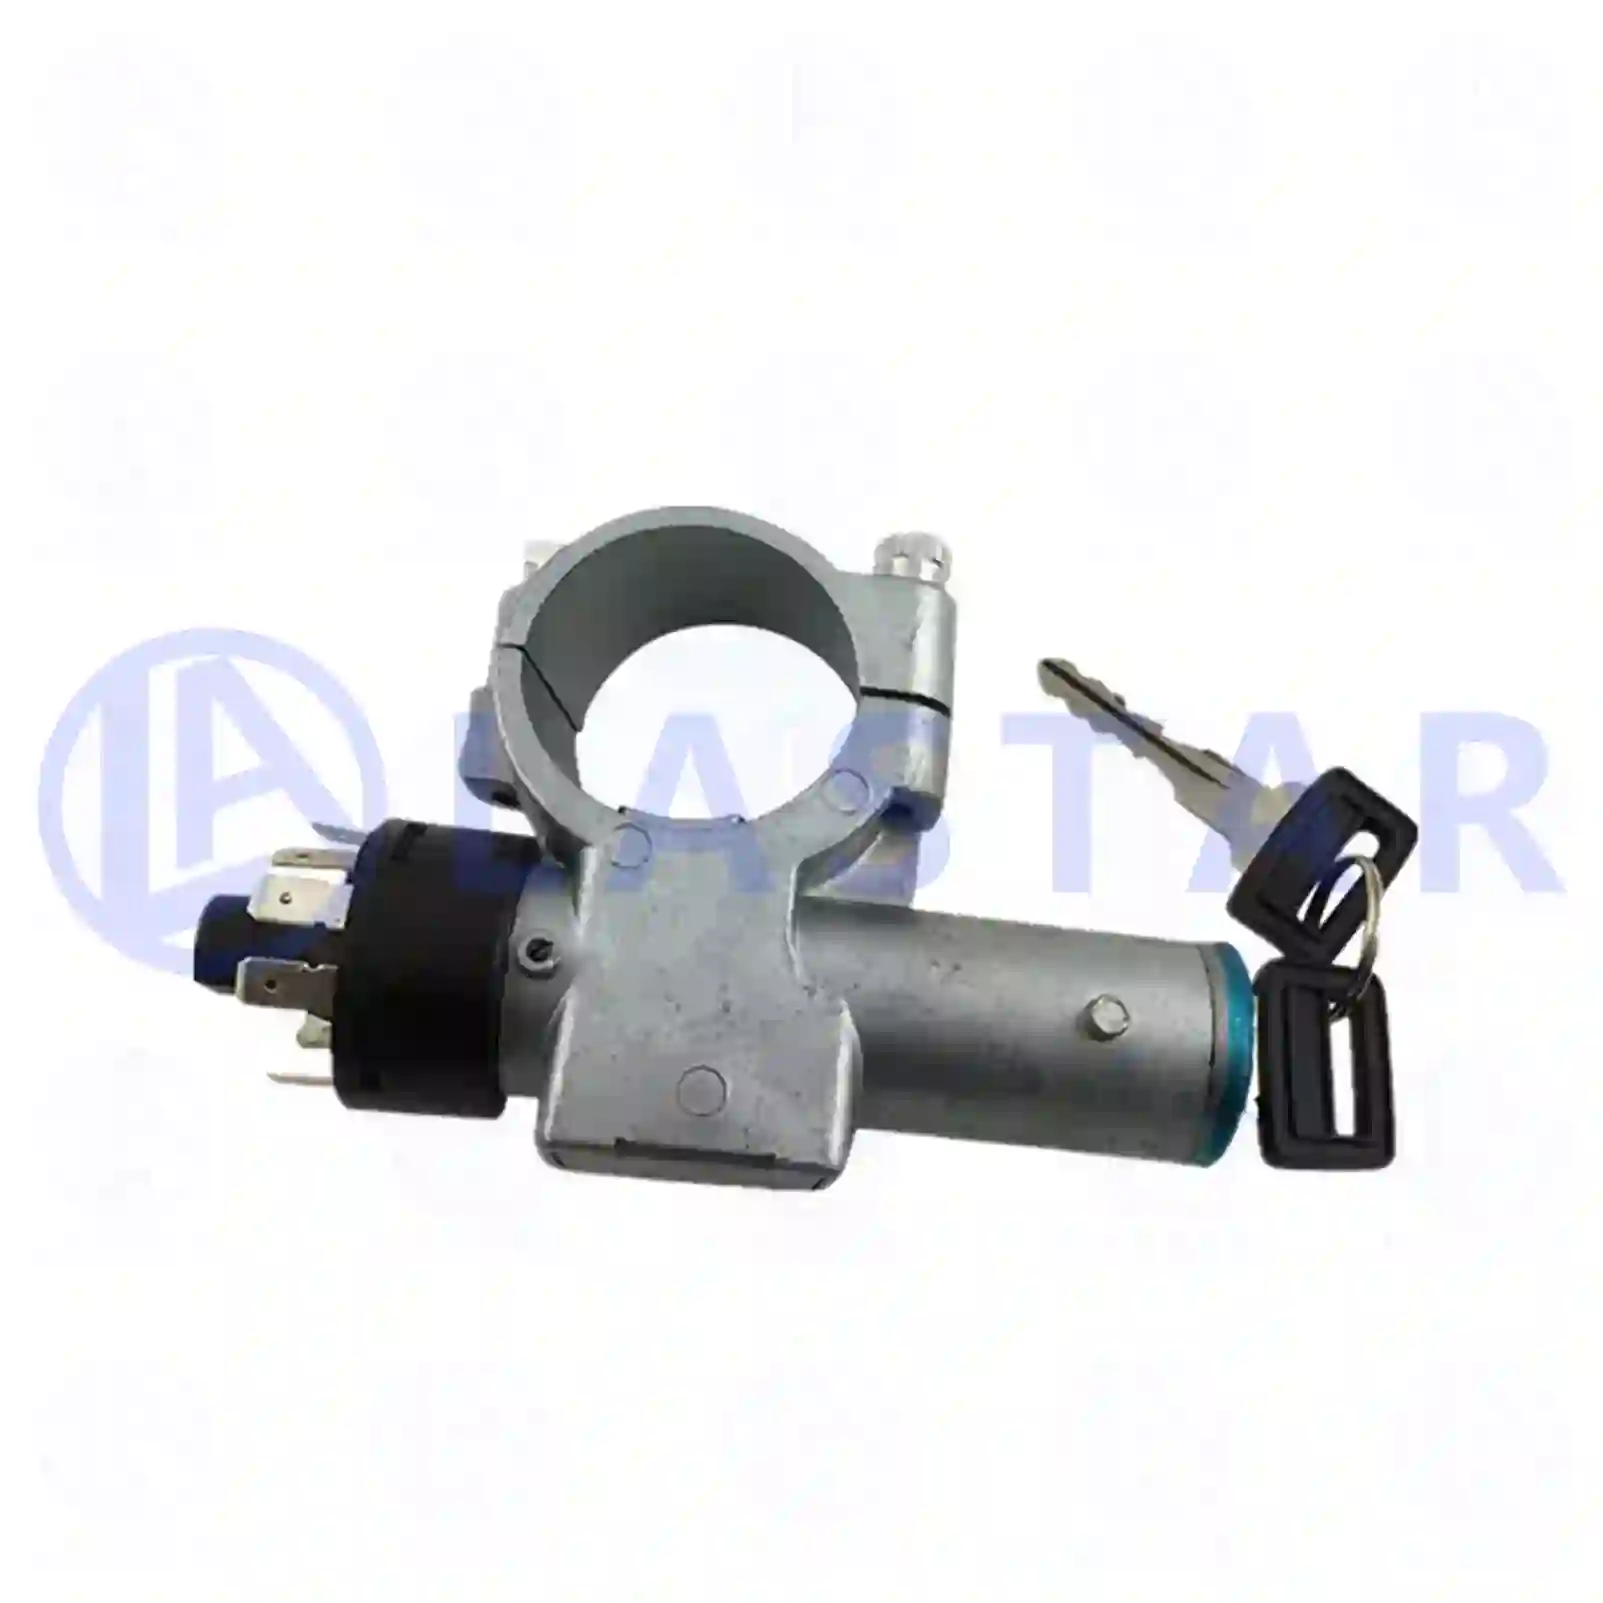 Ignition switch, 77705276, 1080968, 1578868, 1591957, 1605276, 8121785 ||  77705276 Lastar Spare Part | Truck Spare Parts, Auotomotive Spare Parts Ignition switch, 77705276, 1080968, 1578868, 1591957, 1605276, 8121785 ||  77705276 Lastar Spare Part | Truck Spare Parts, Auotomotive Spare Parts